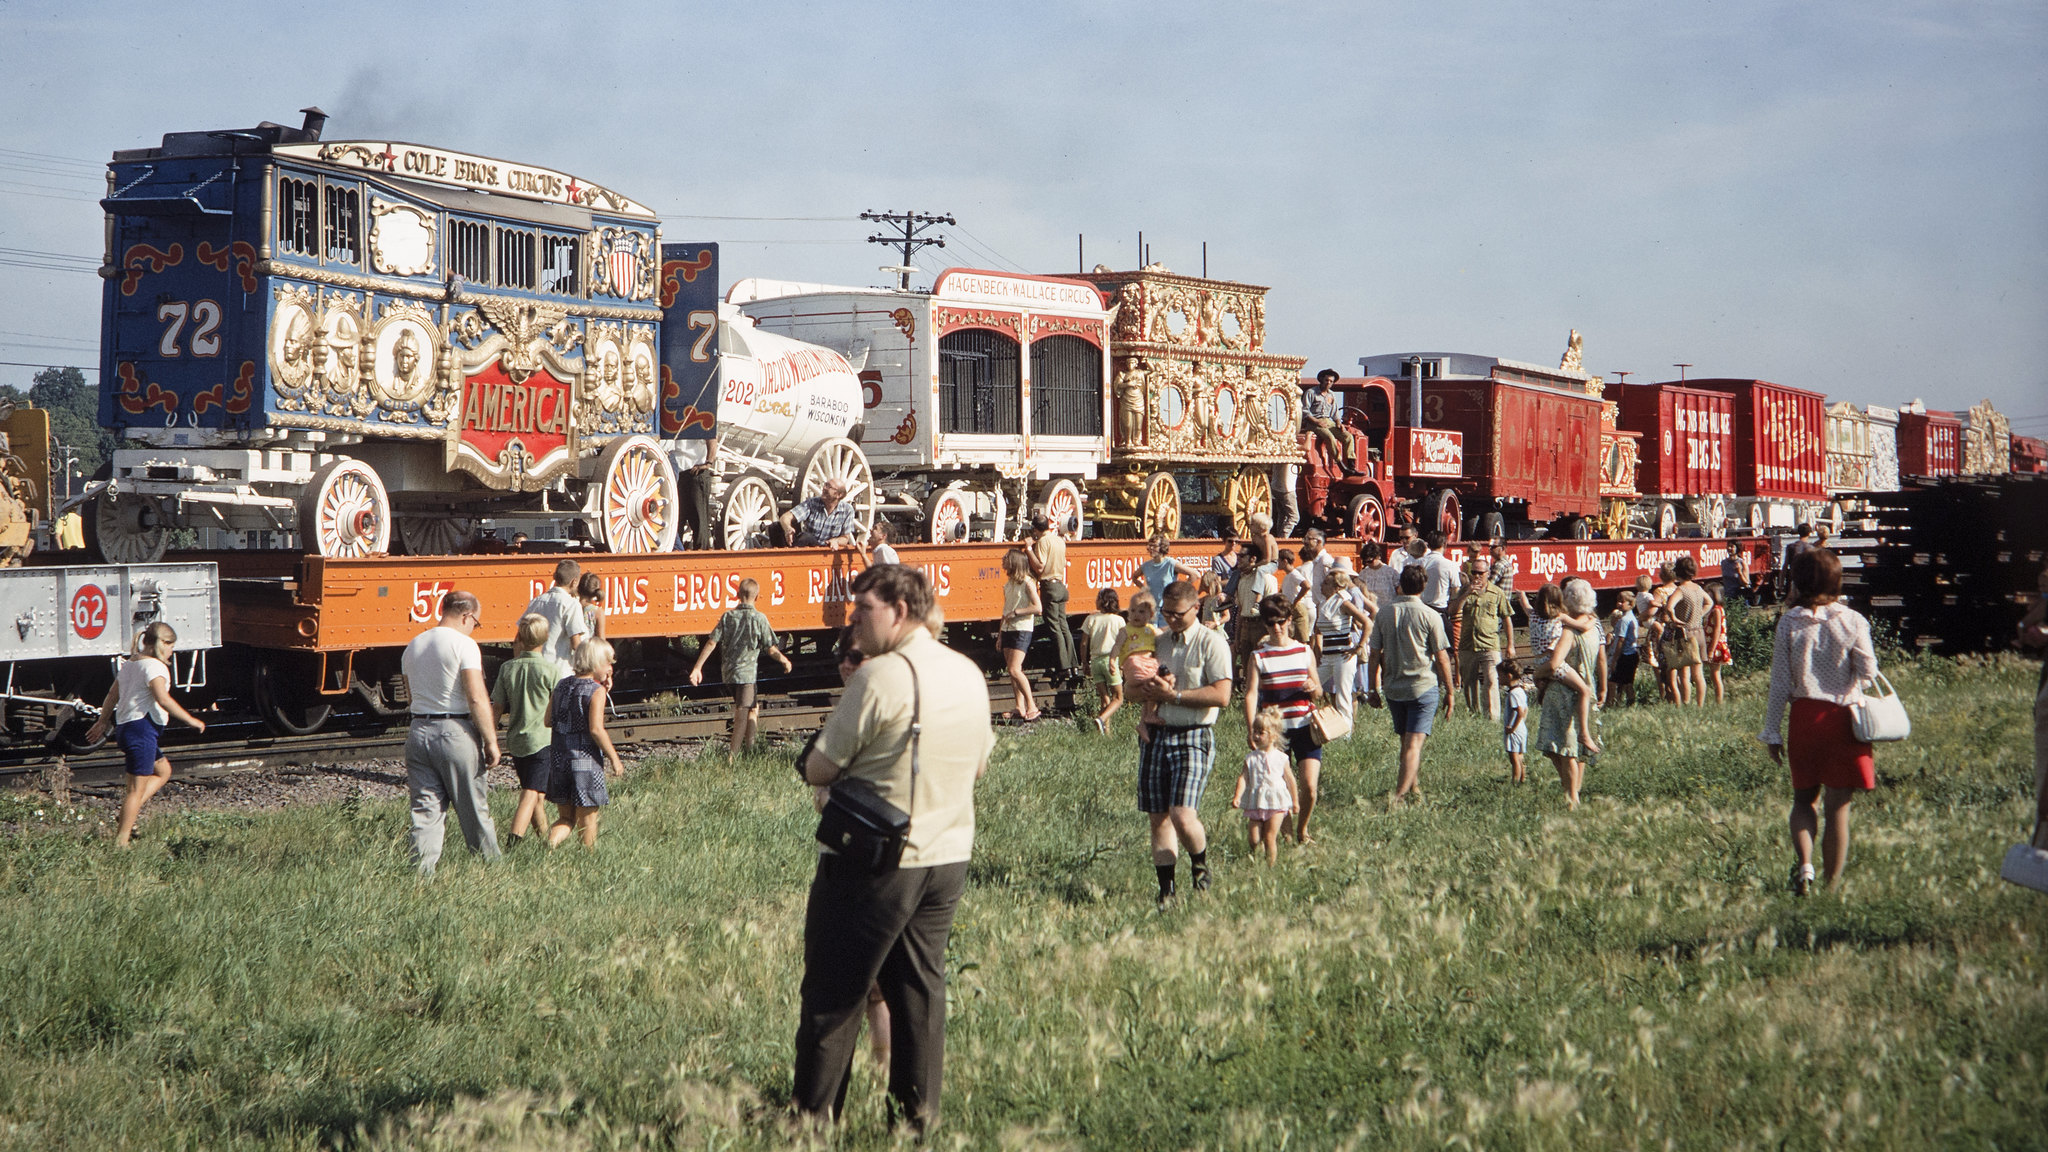 A crowd of people views the Milwaukee Circus Train from Circus World Museum during its stop at the Chicago and North Western Railway yard in Madison, Wisconsin on June 30, 1970. Photograph by Thomas F. McIlwraith